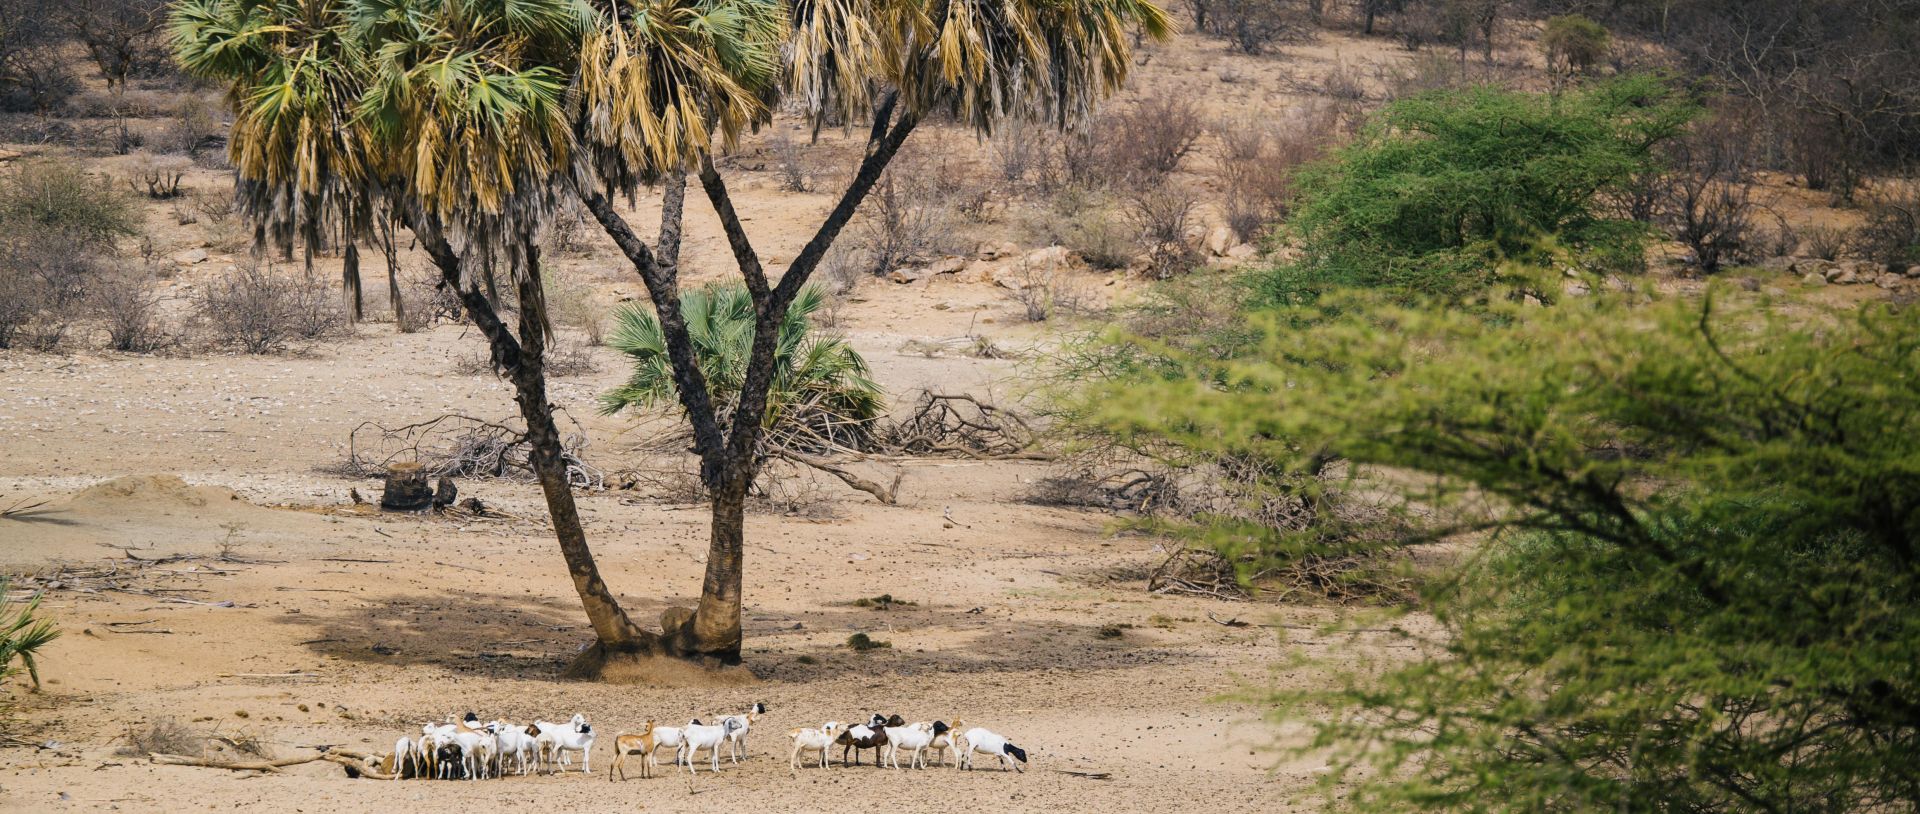 Goats at the Gue watering hole in Kenya